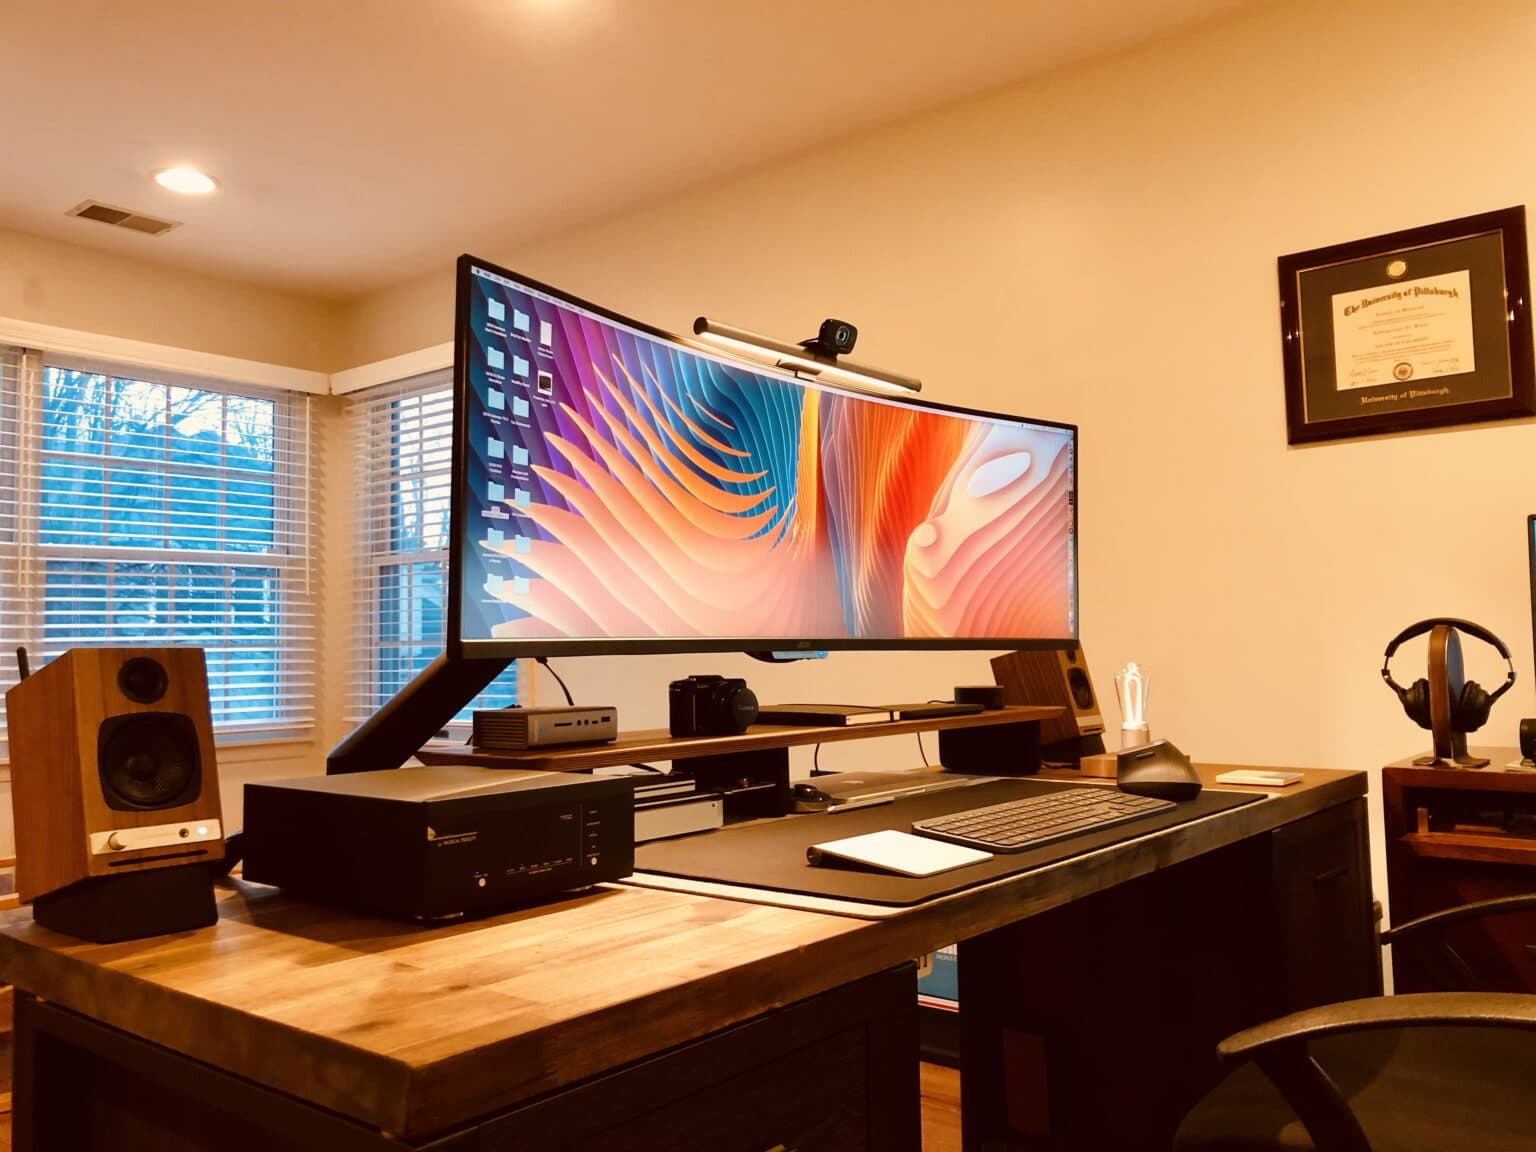 Dr. Edward Wang's setup features an ultra-wide monitor.